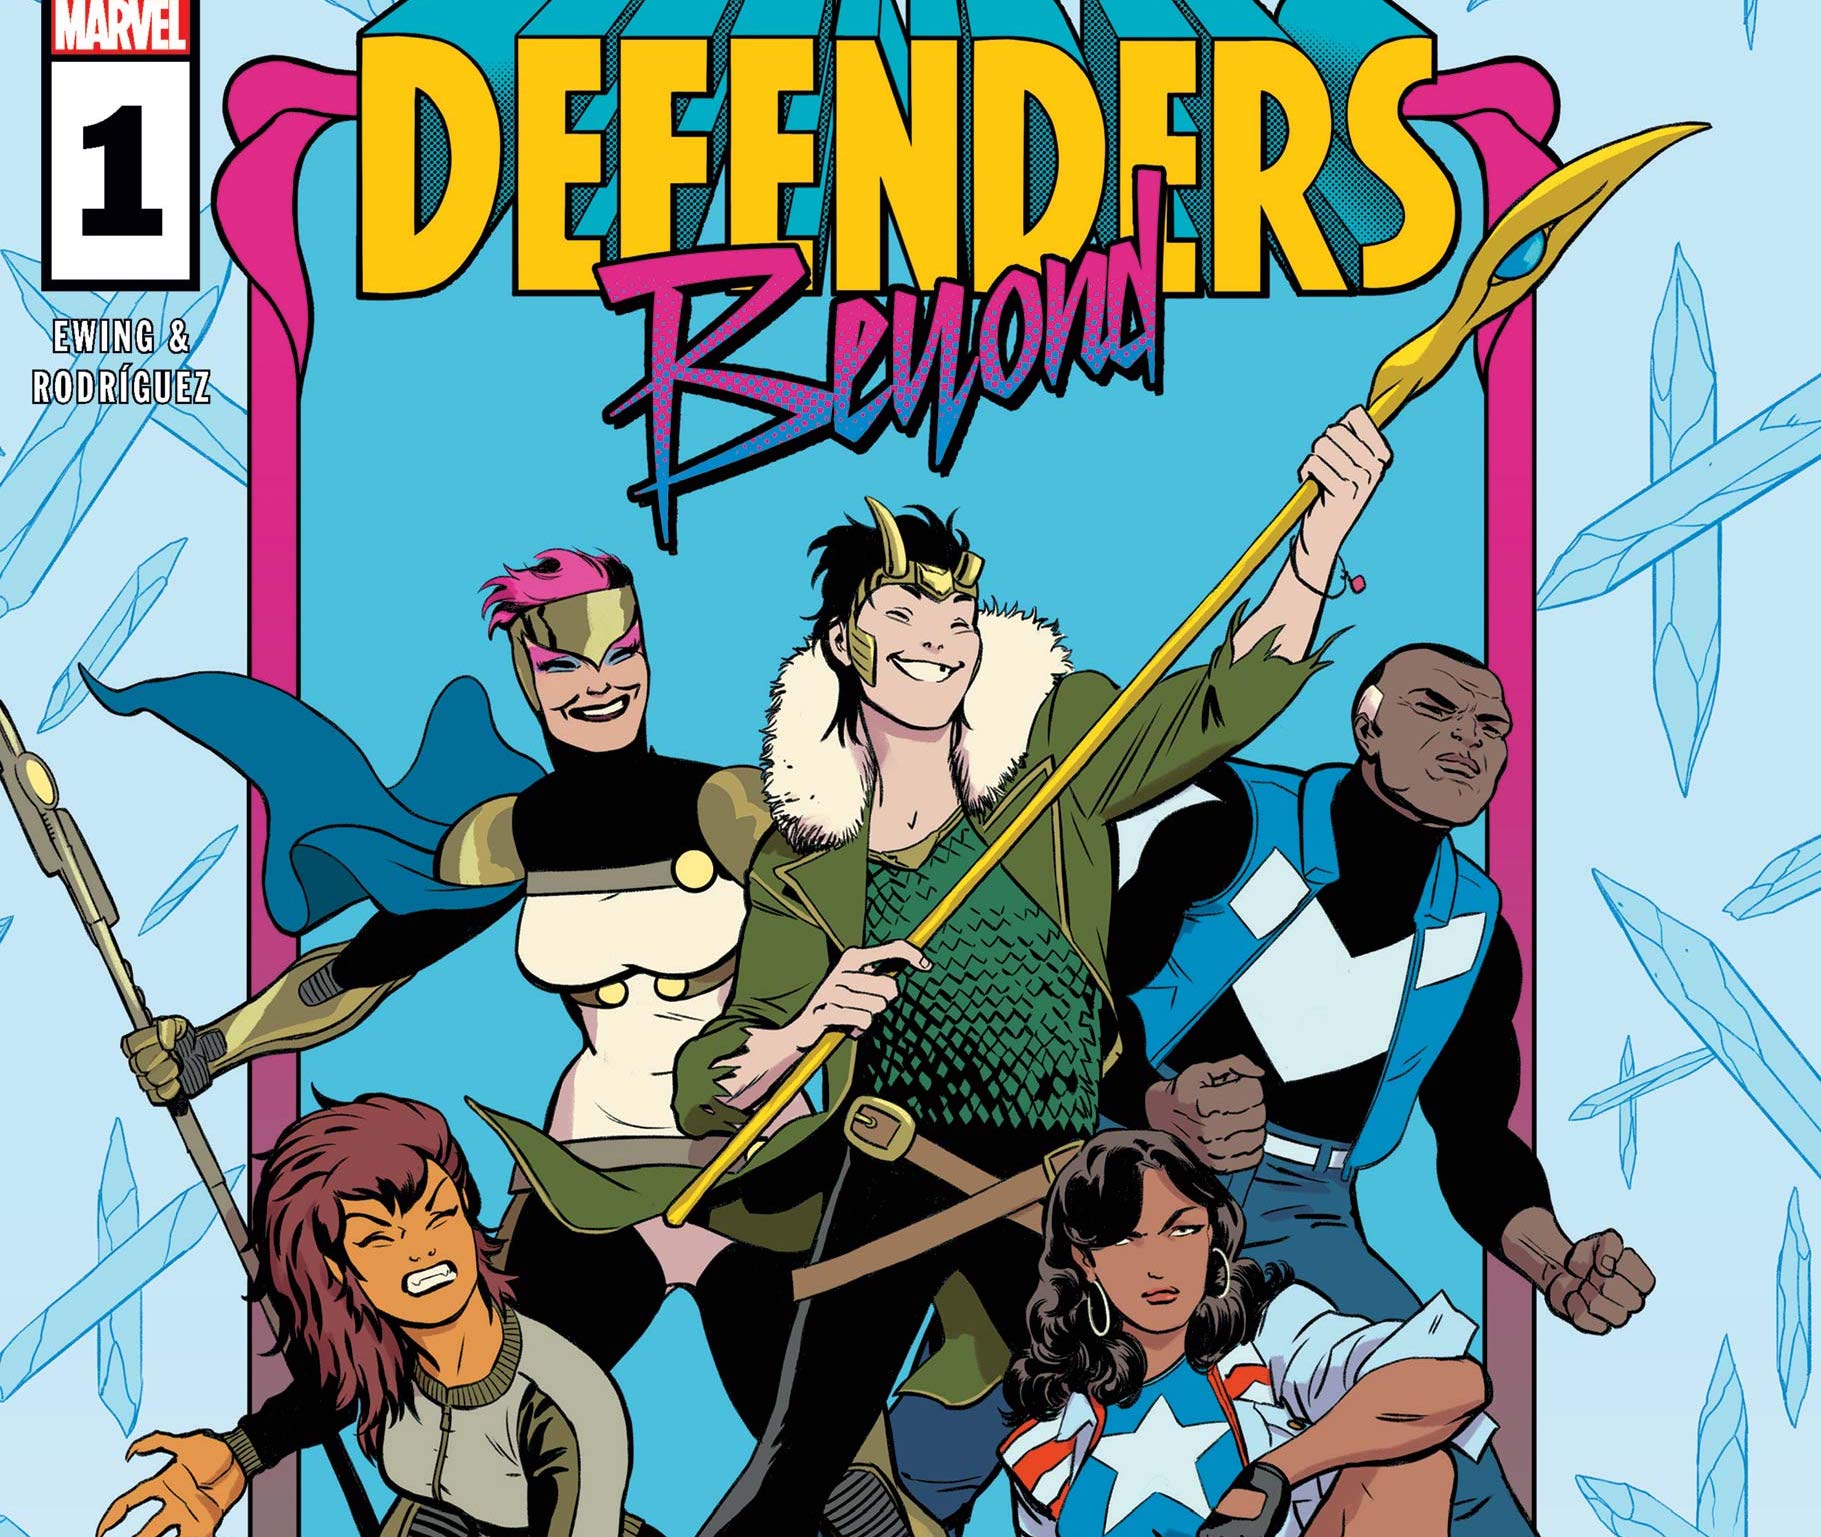 'Defenders: Beyond' #1 establishes its deep roots in Marvel history